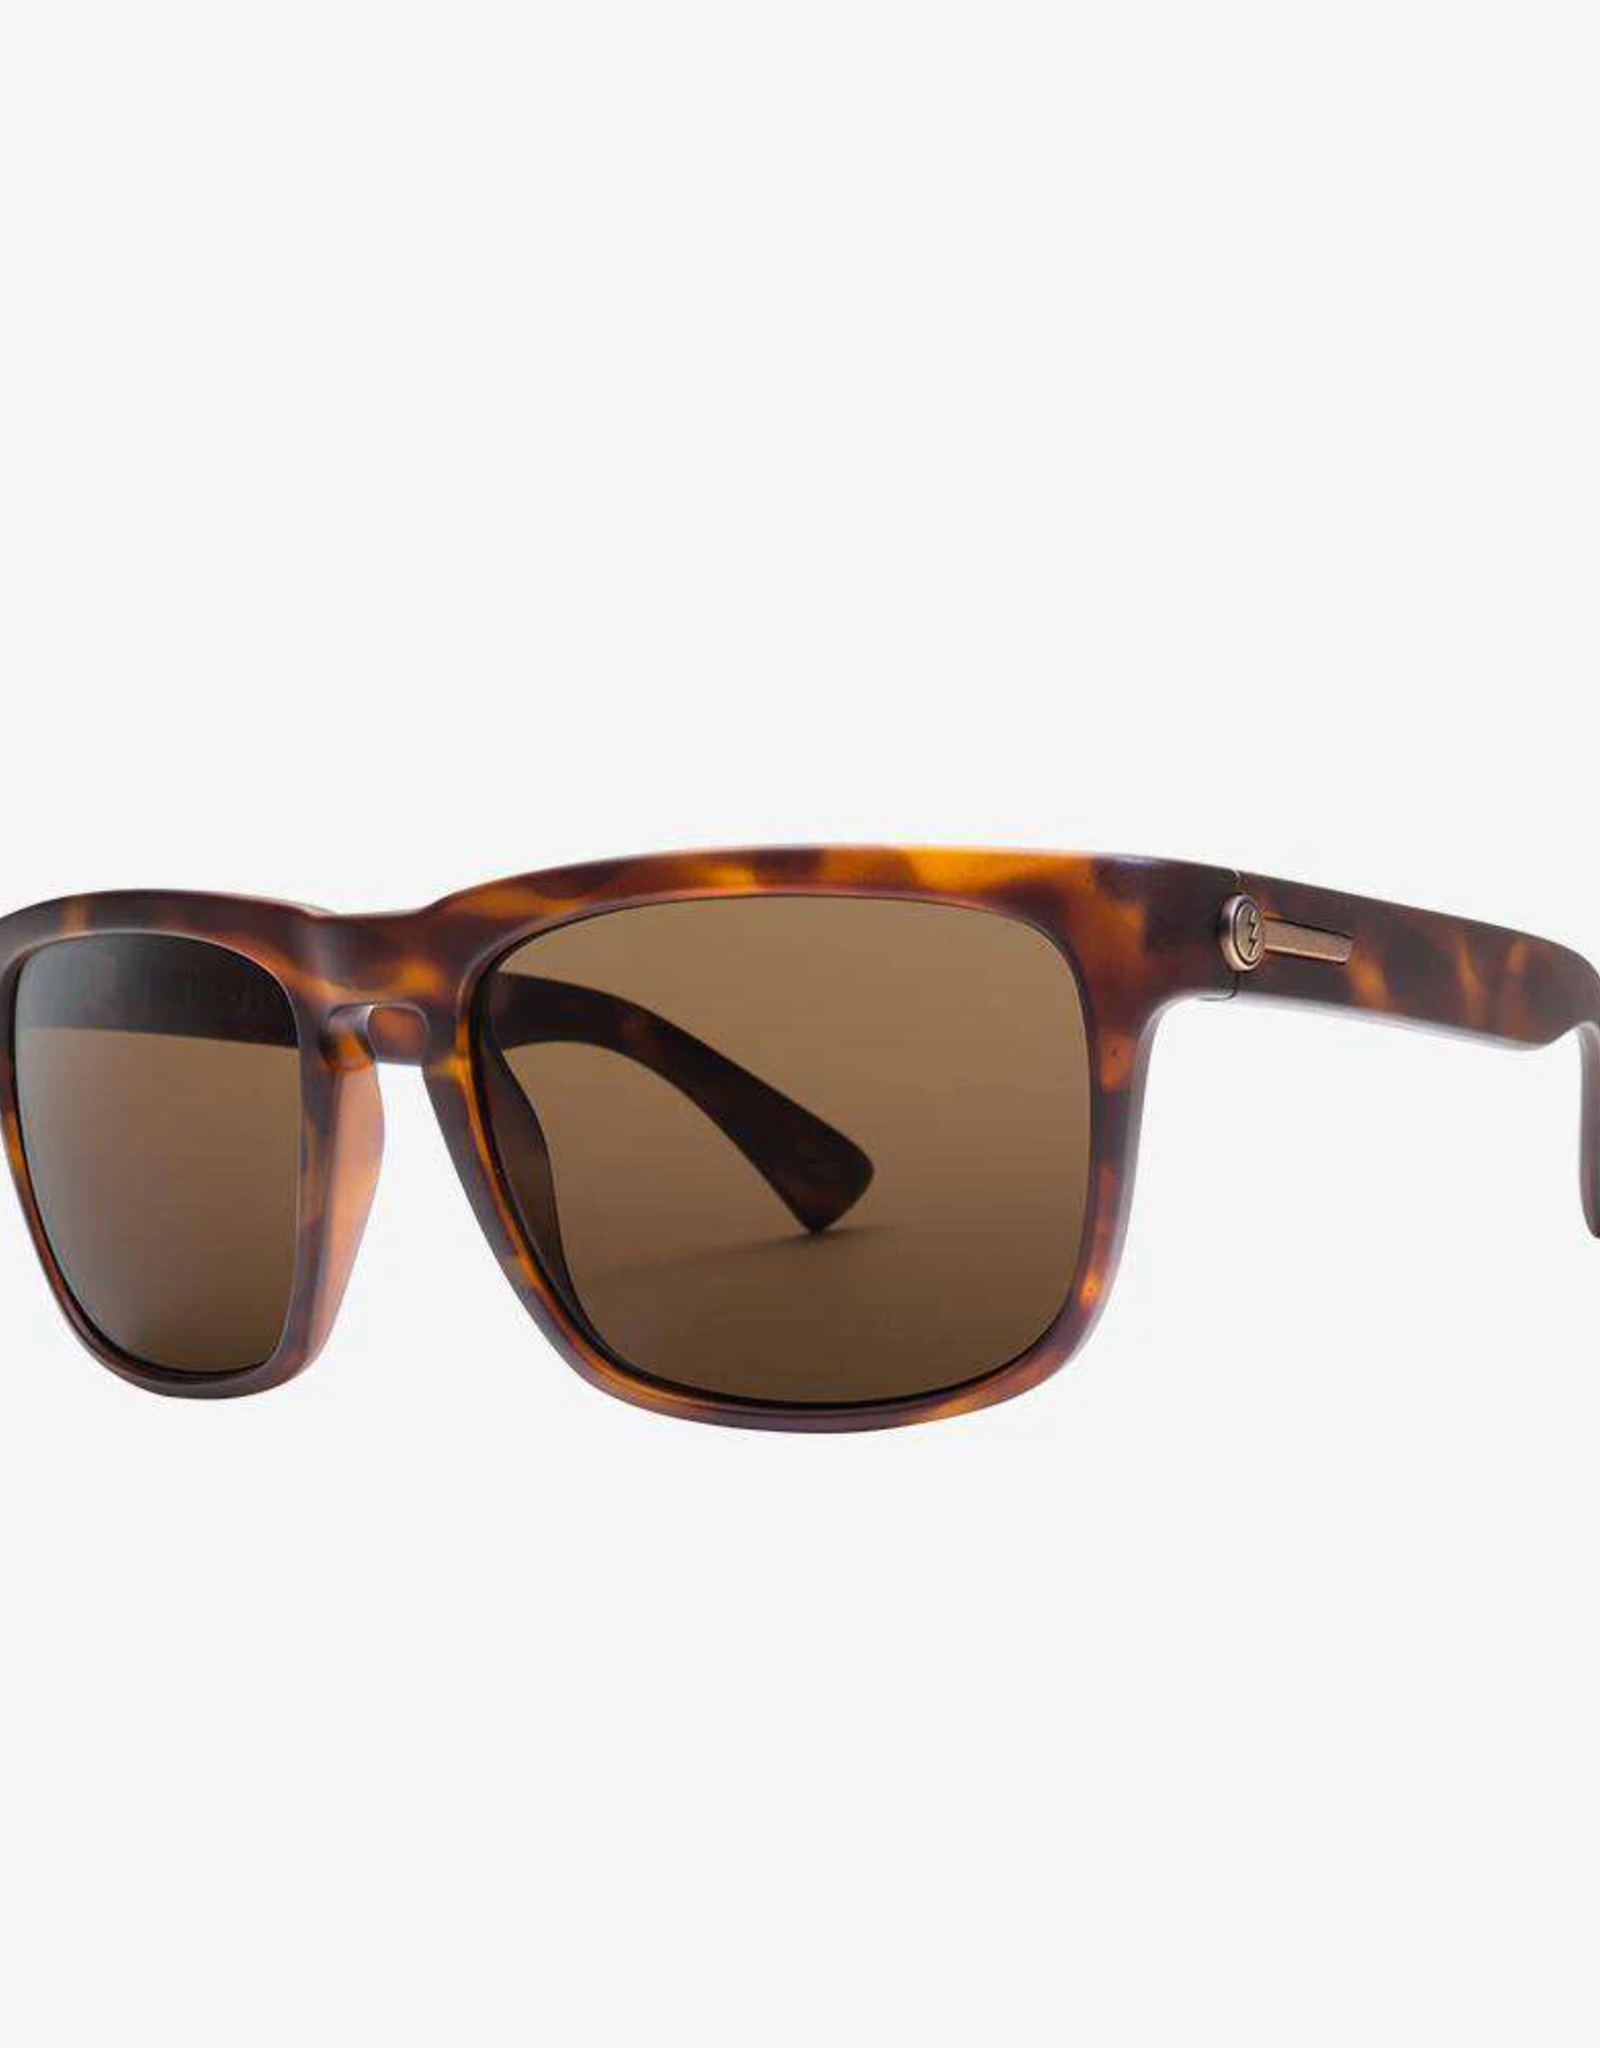 Electric Visual Electric - KNOXVILLE - Matte Tort w/ POLAR Bronze